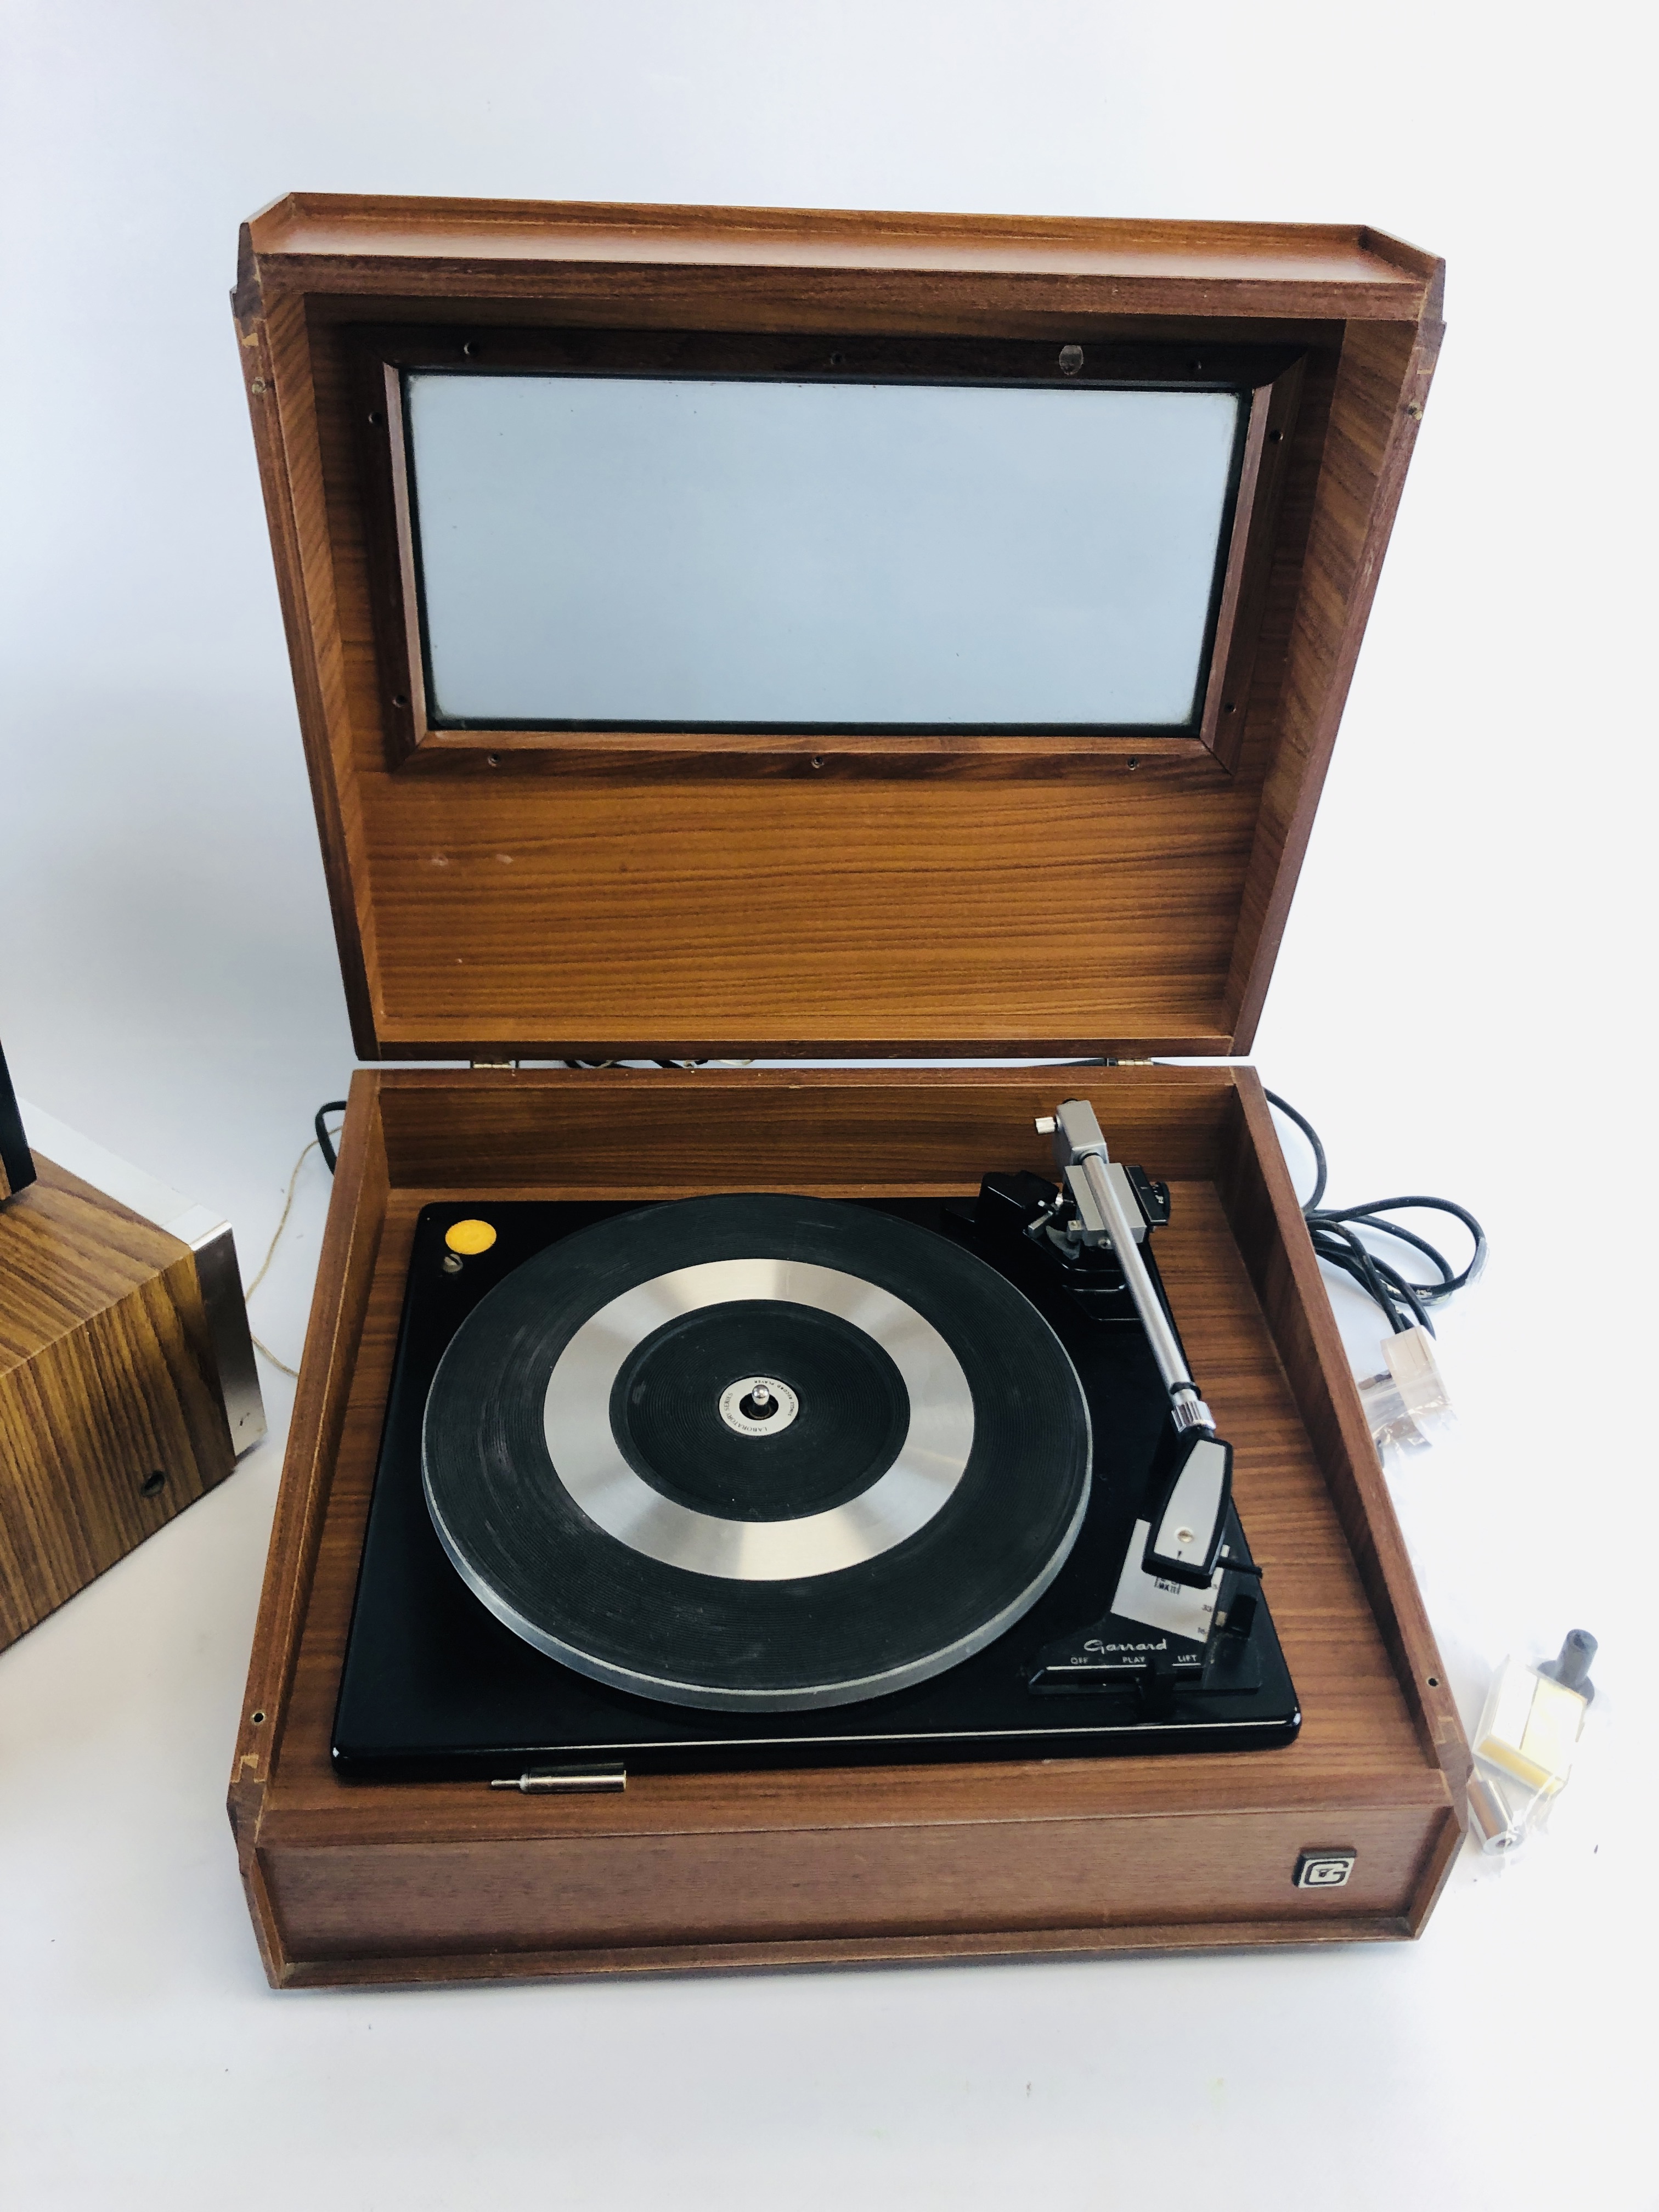 A GOODMANS GARARD MUSIC SWEET RECORD PLAYER MODEL 3025 ALONG WITH TWO PIECES OF ROTEL AUDIO - Image 4 of 8